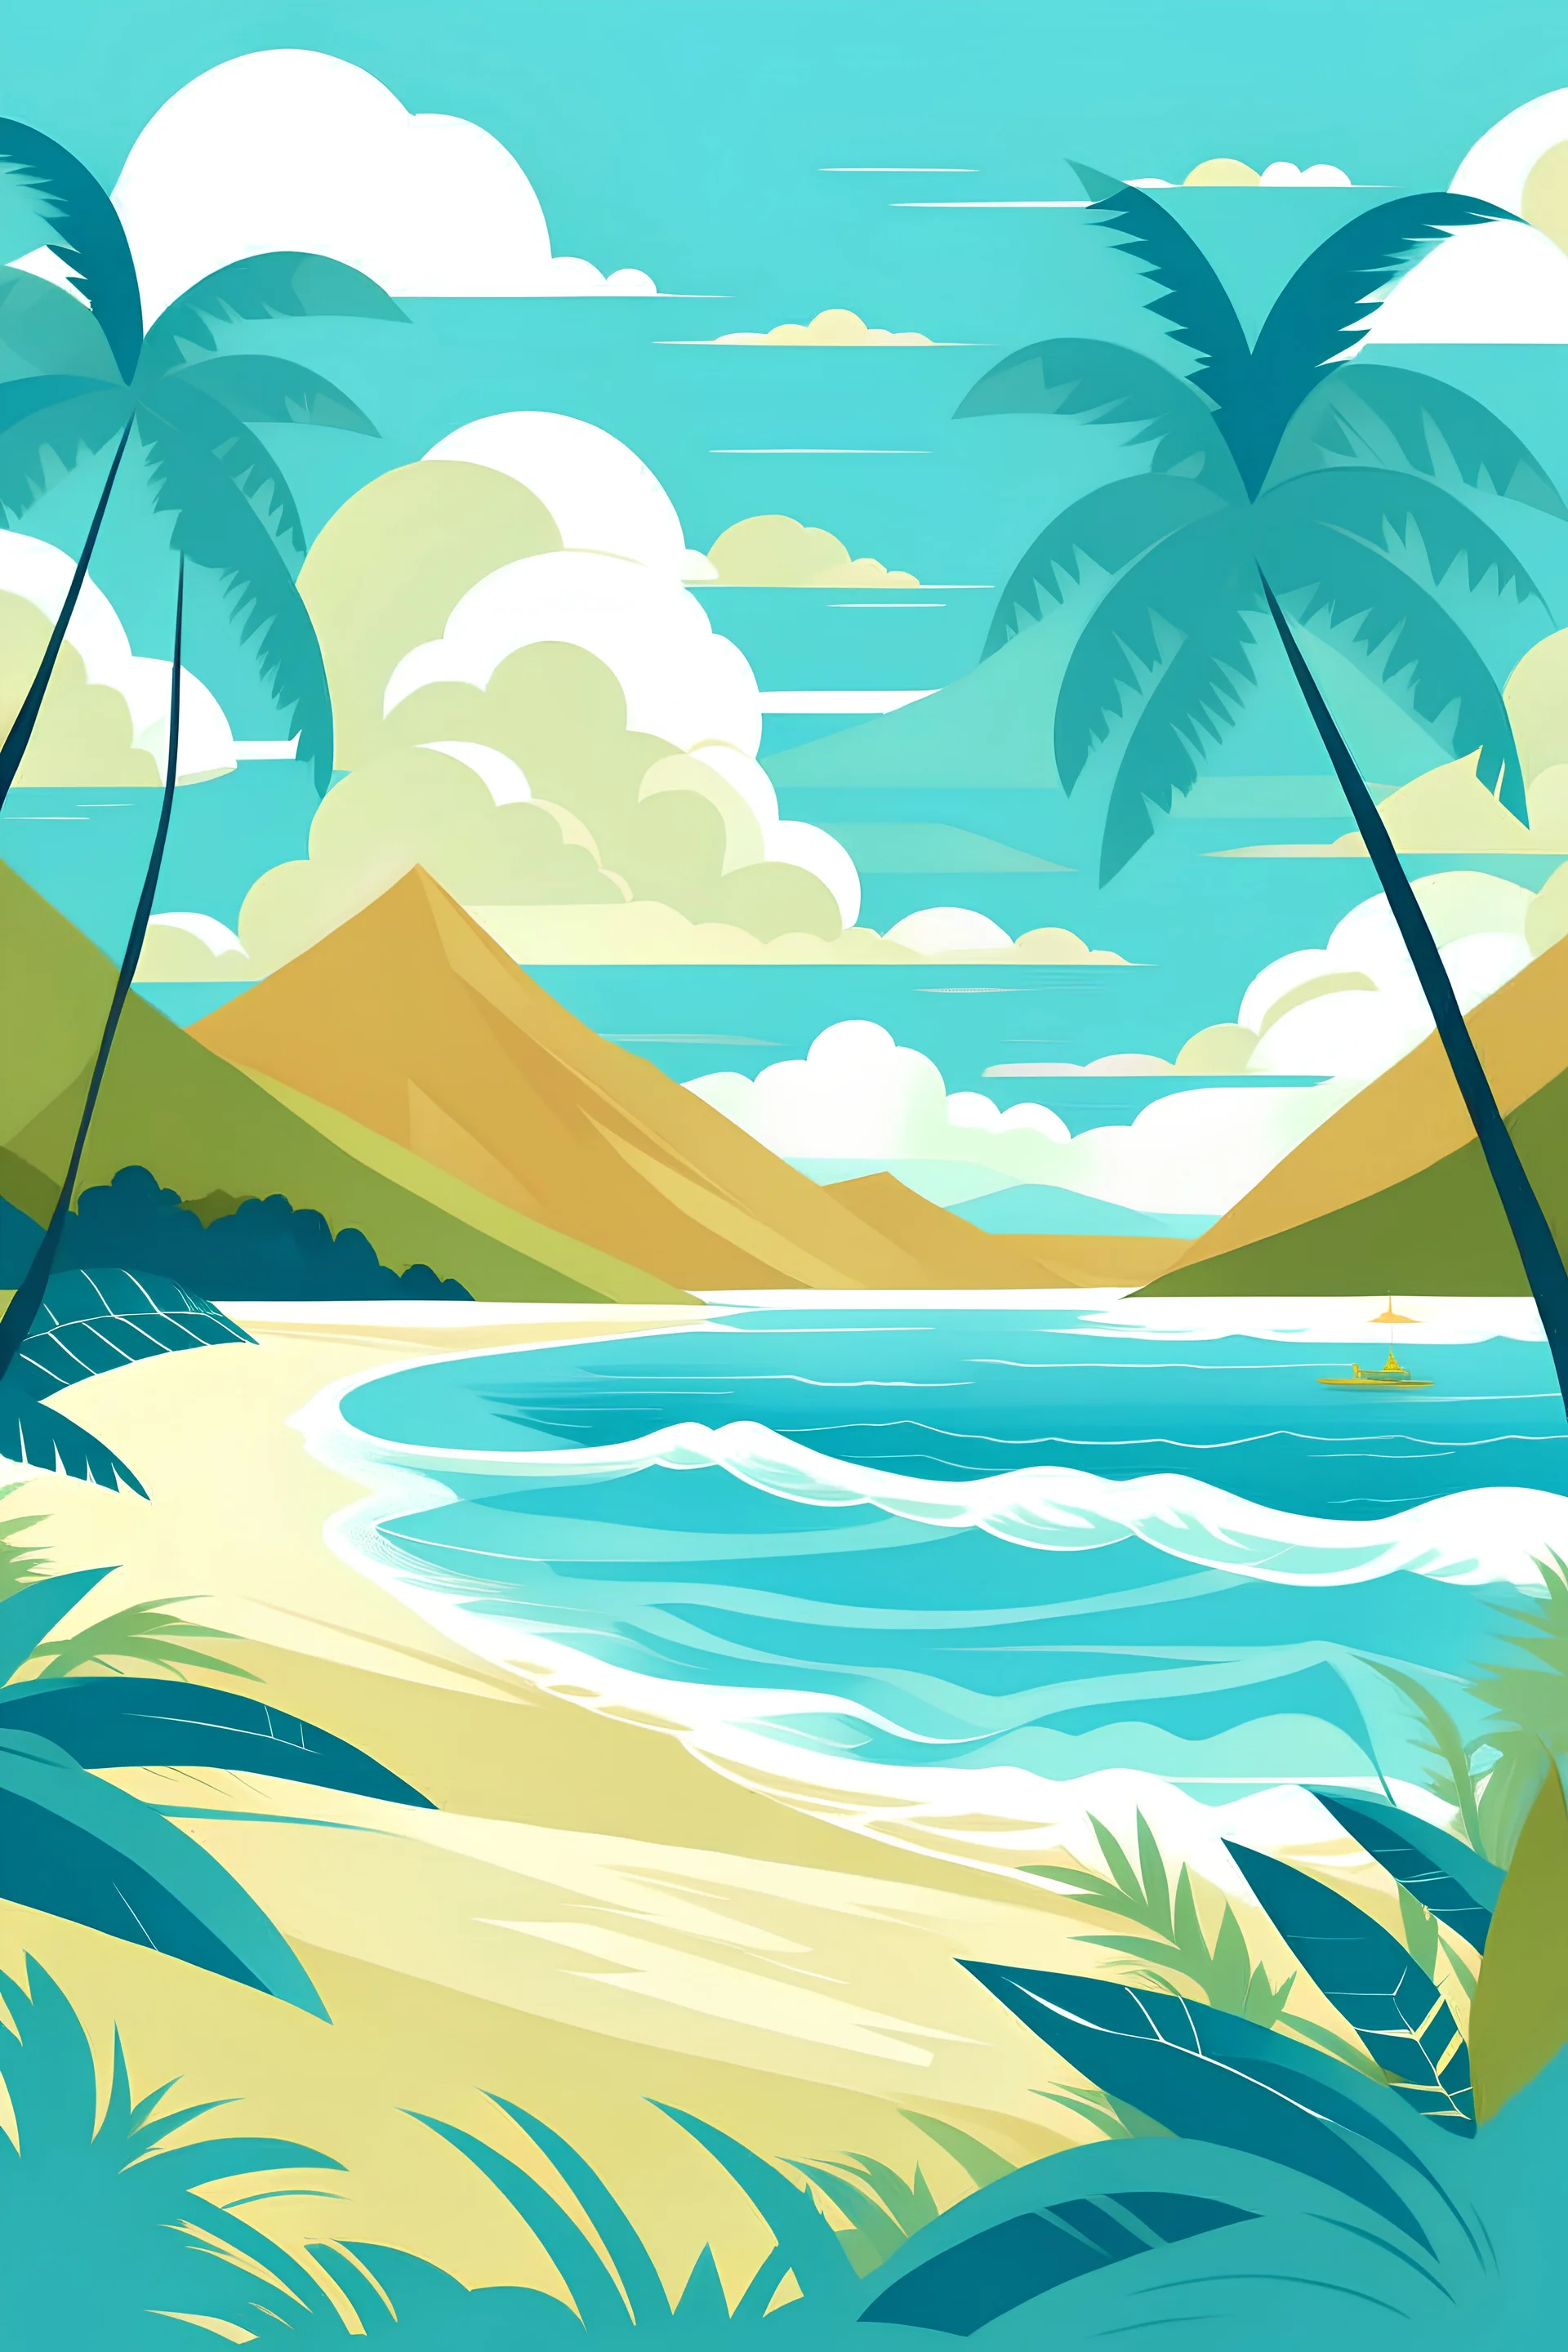 Create a design that reflects the natural beauty of the Dominican Republic's tropical beaches and landscapes, with illustrations of palm trees, white sands, crystal clear waters and the Caribbean sun.